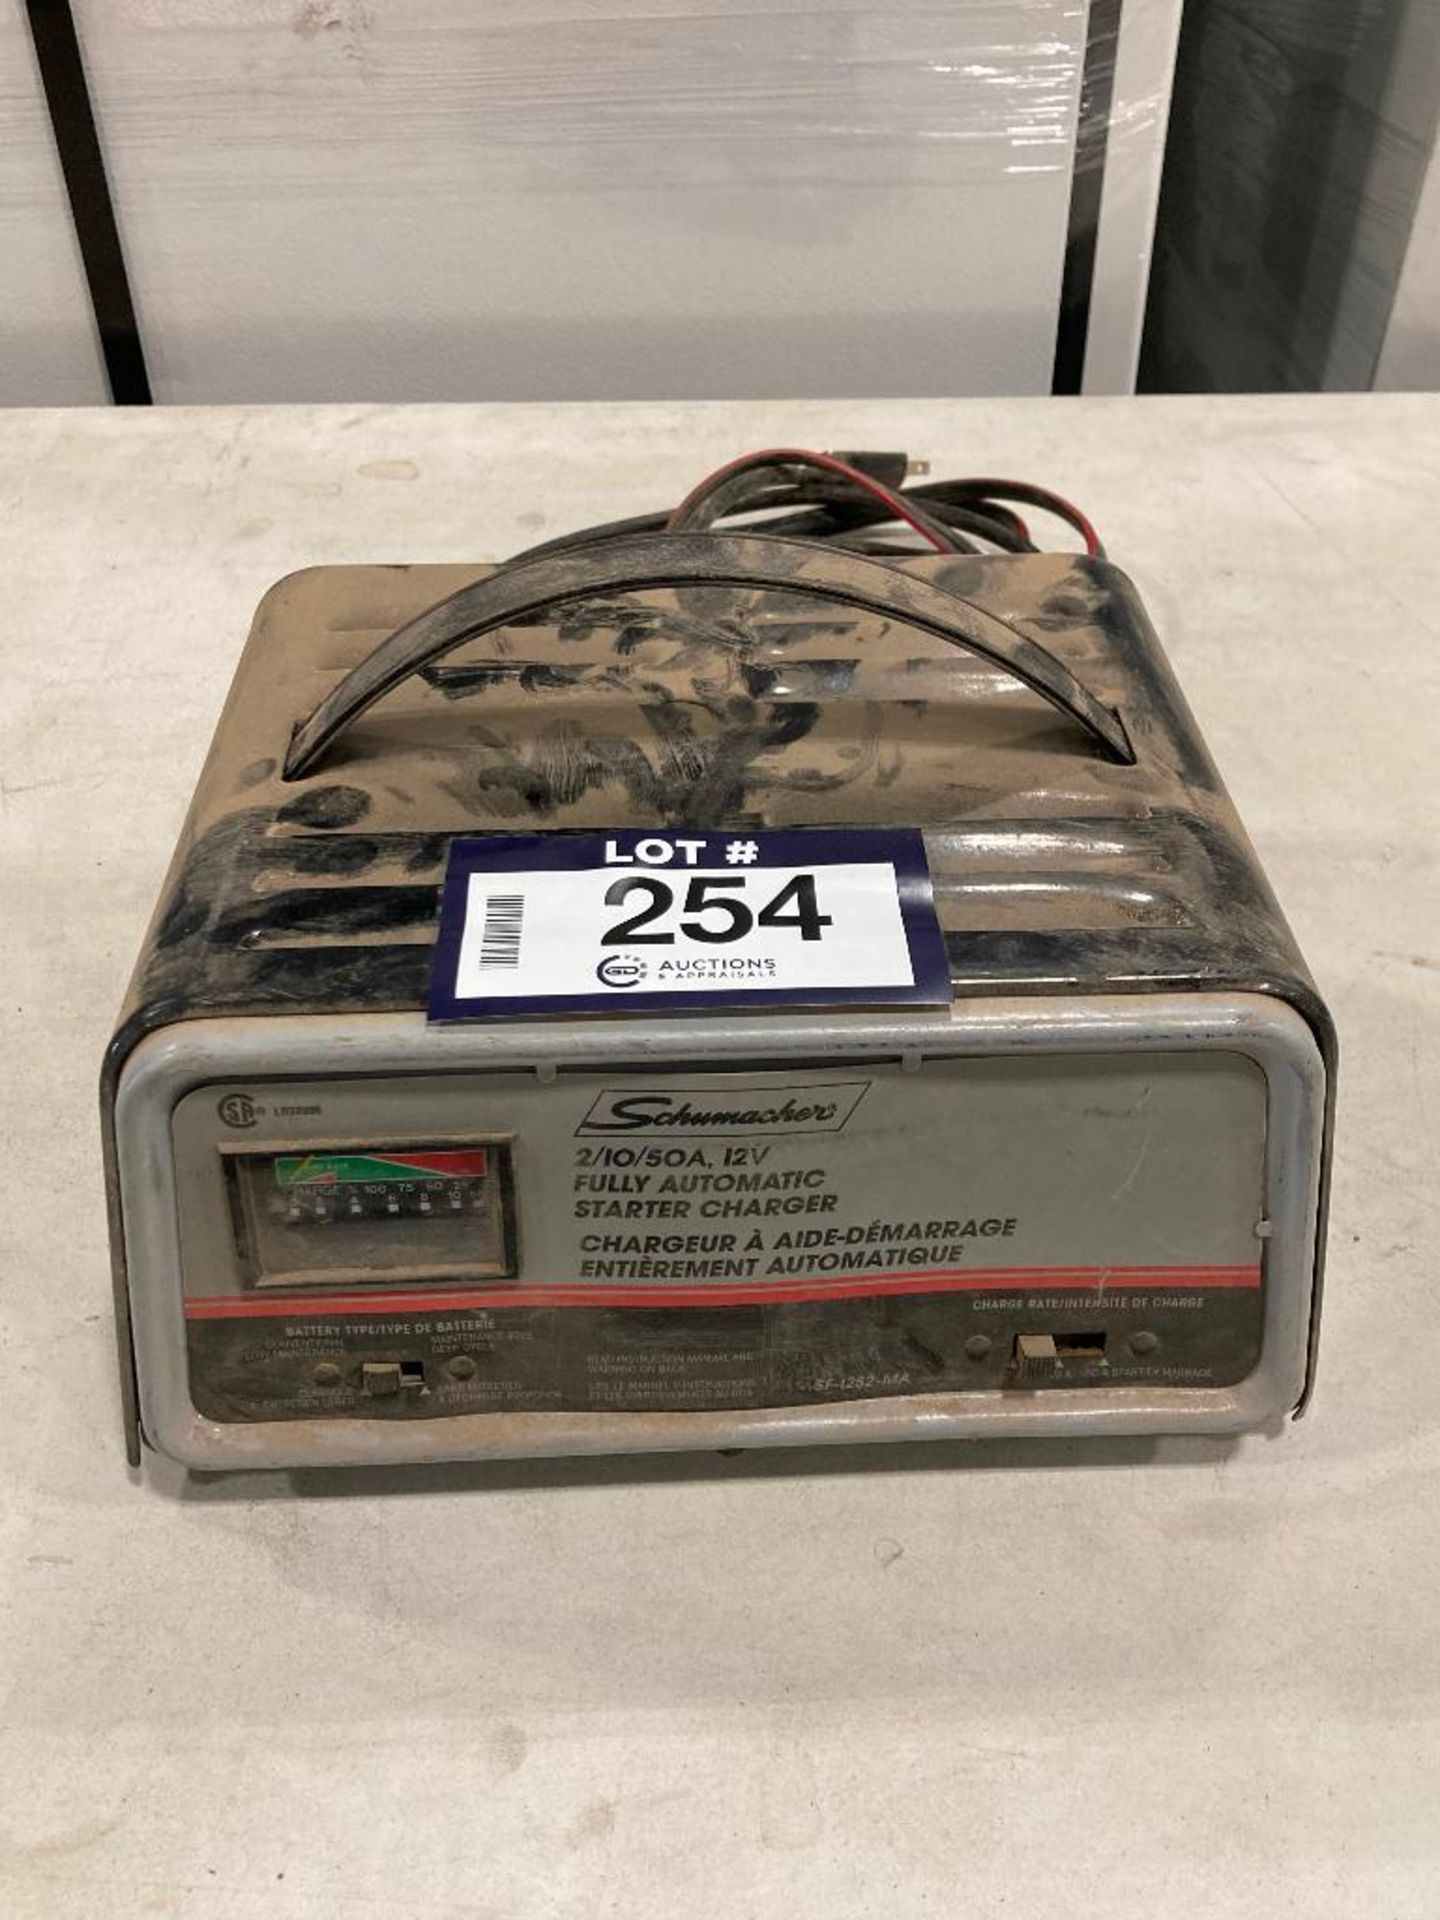 Schumacher 2/10/50 AMP Fully Automatic Starter Charger SE-5212A